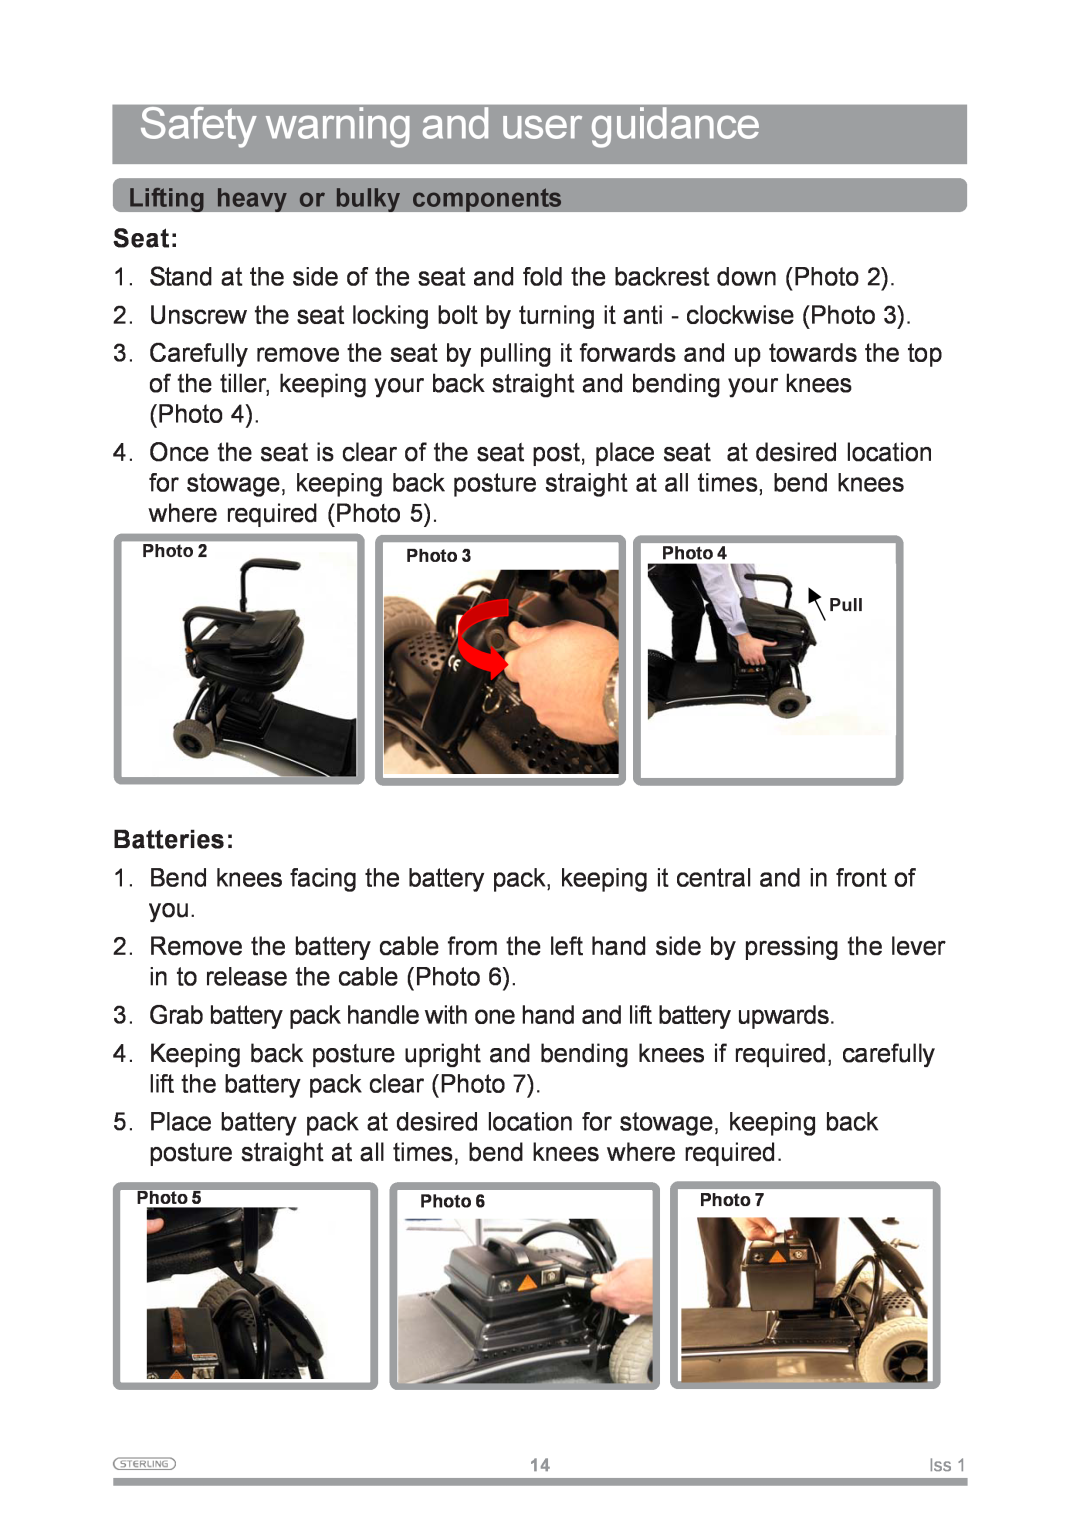 Sunrise Medical Mobility Scooter Lifting heavy or bulky components Seat, Batteries, Safety warning and user guidance 